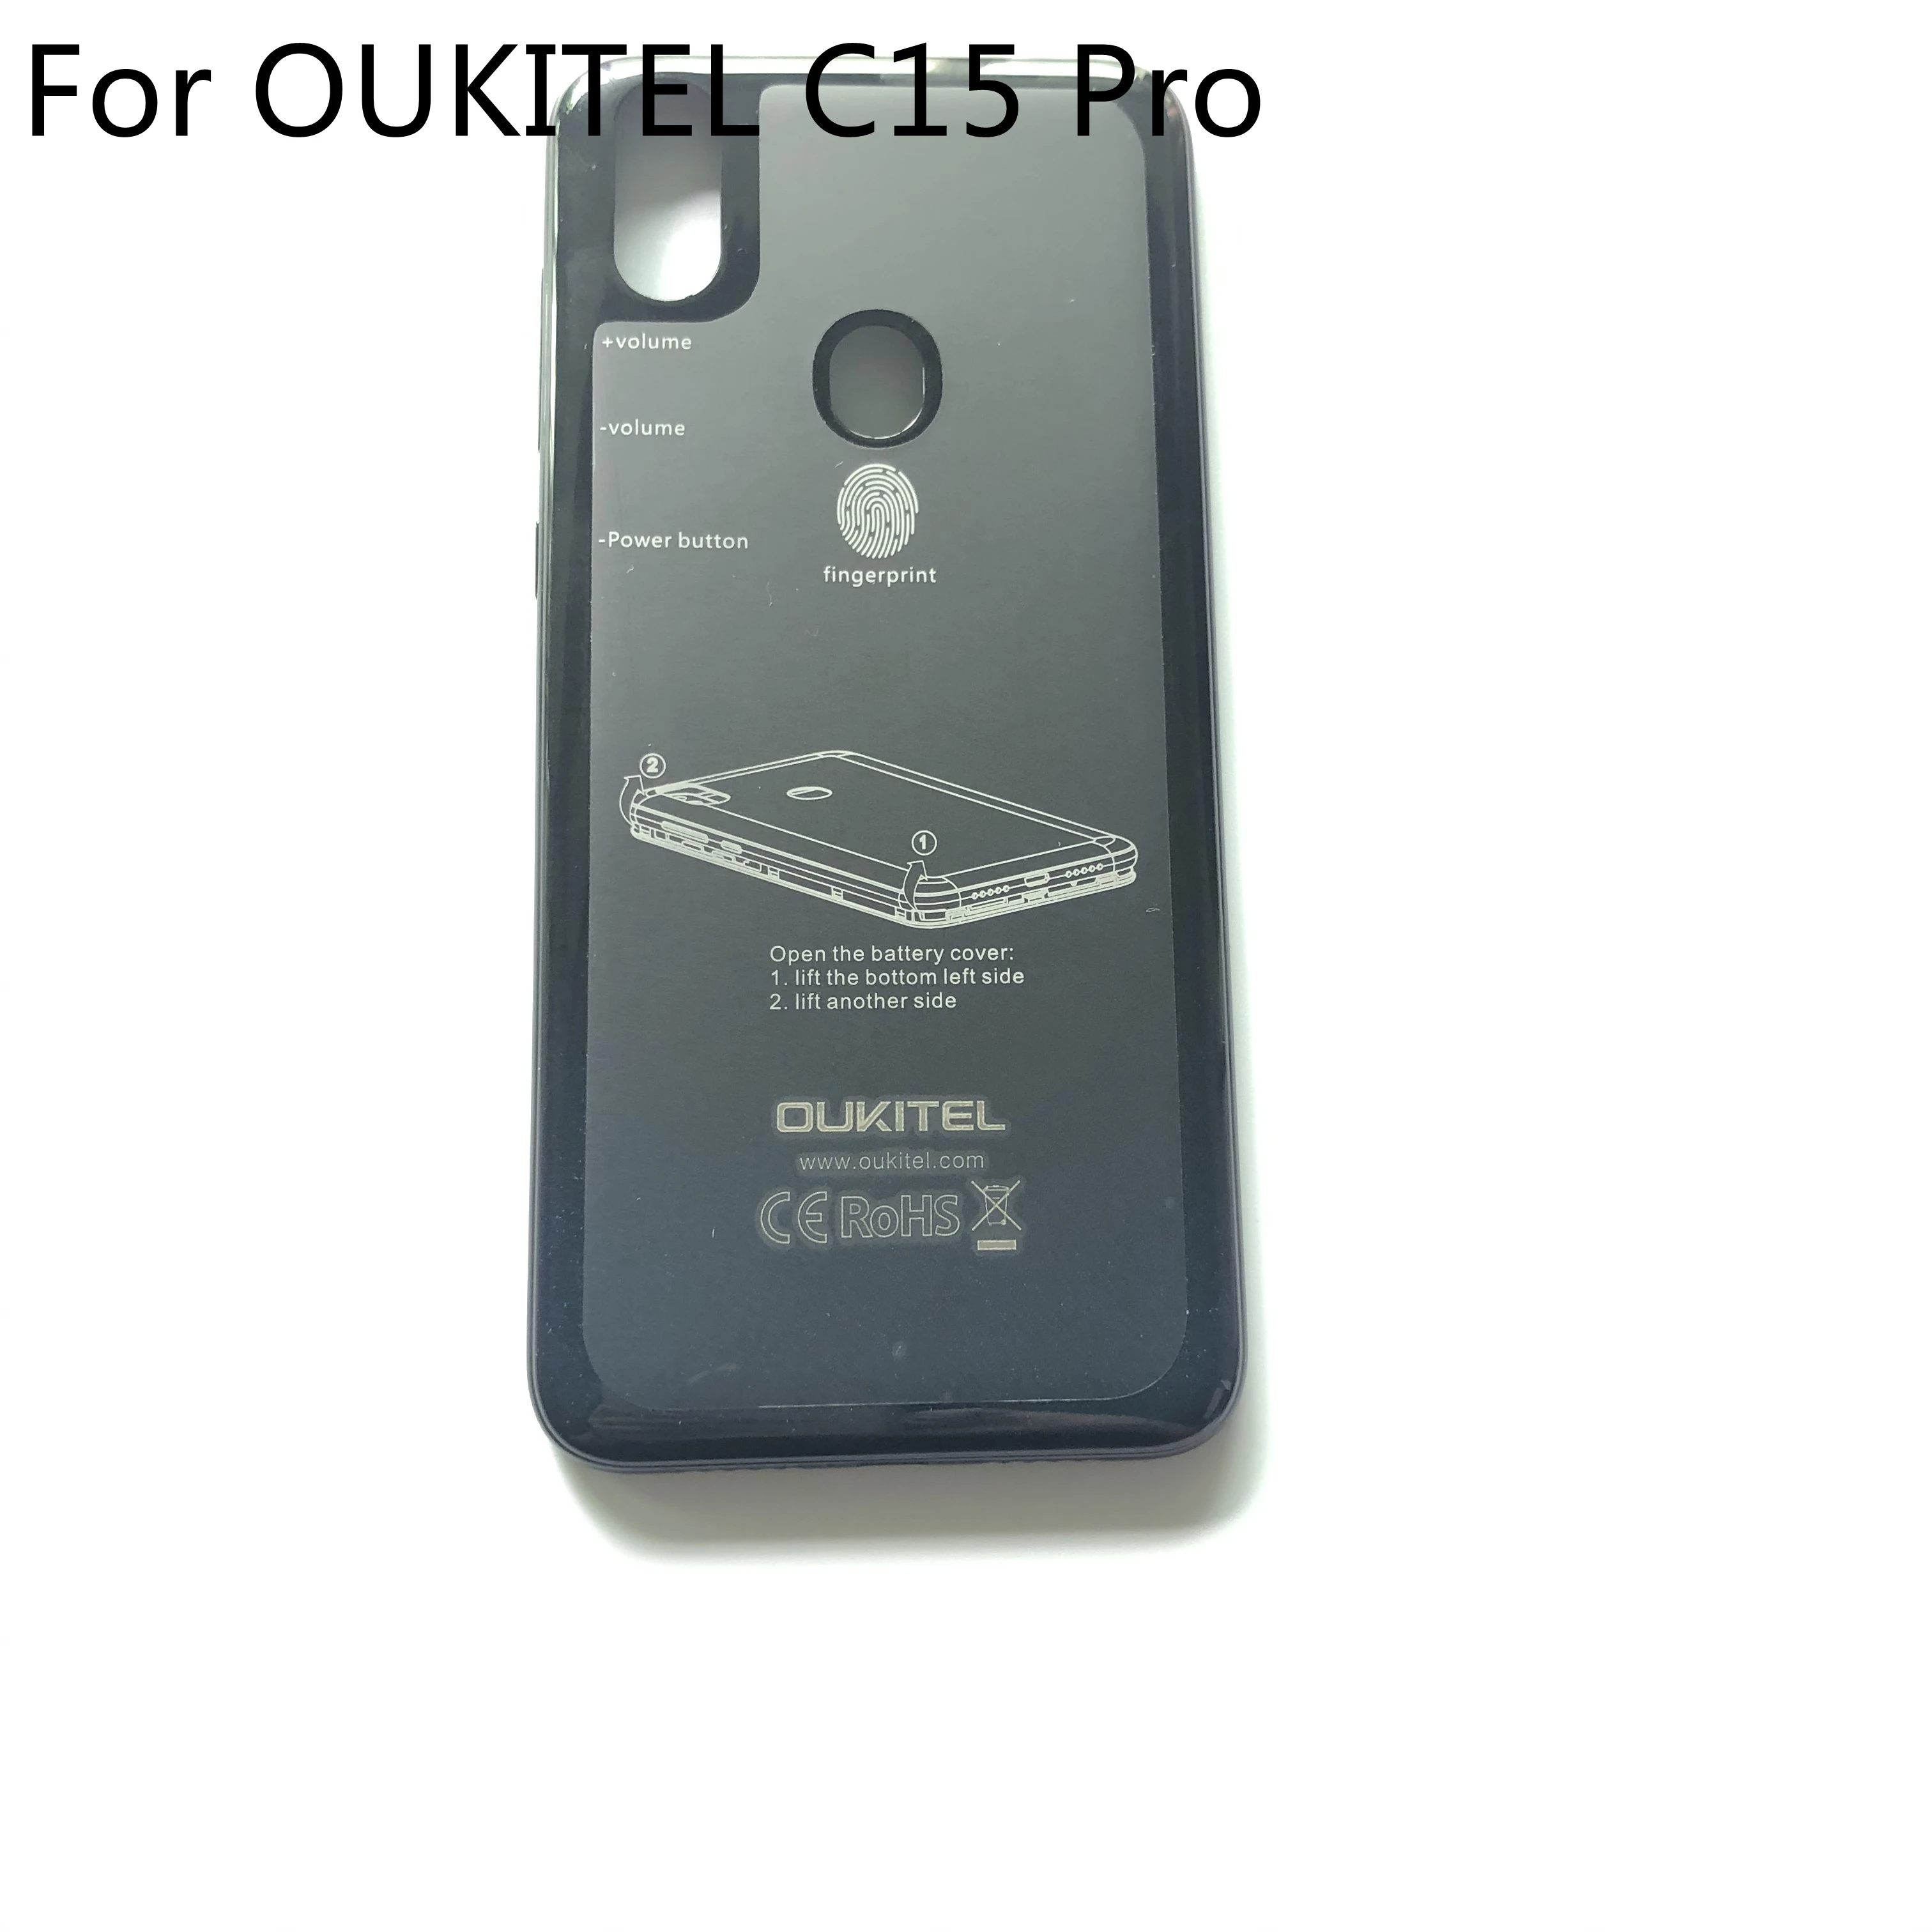 

OUKITEL C15 Pro Used Protective Battery Case Cover Back Shell For OUKITEL C15 Pro MT6761 Quad Core 6.088'' 1280*600 Smartphone